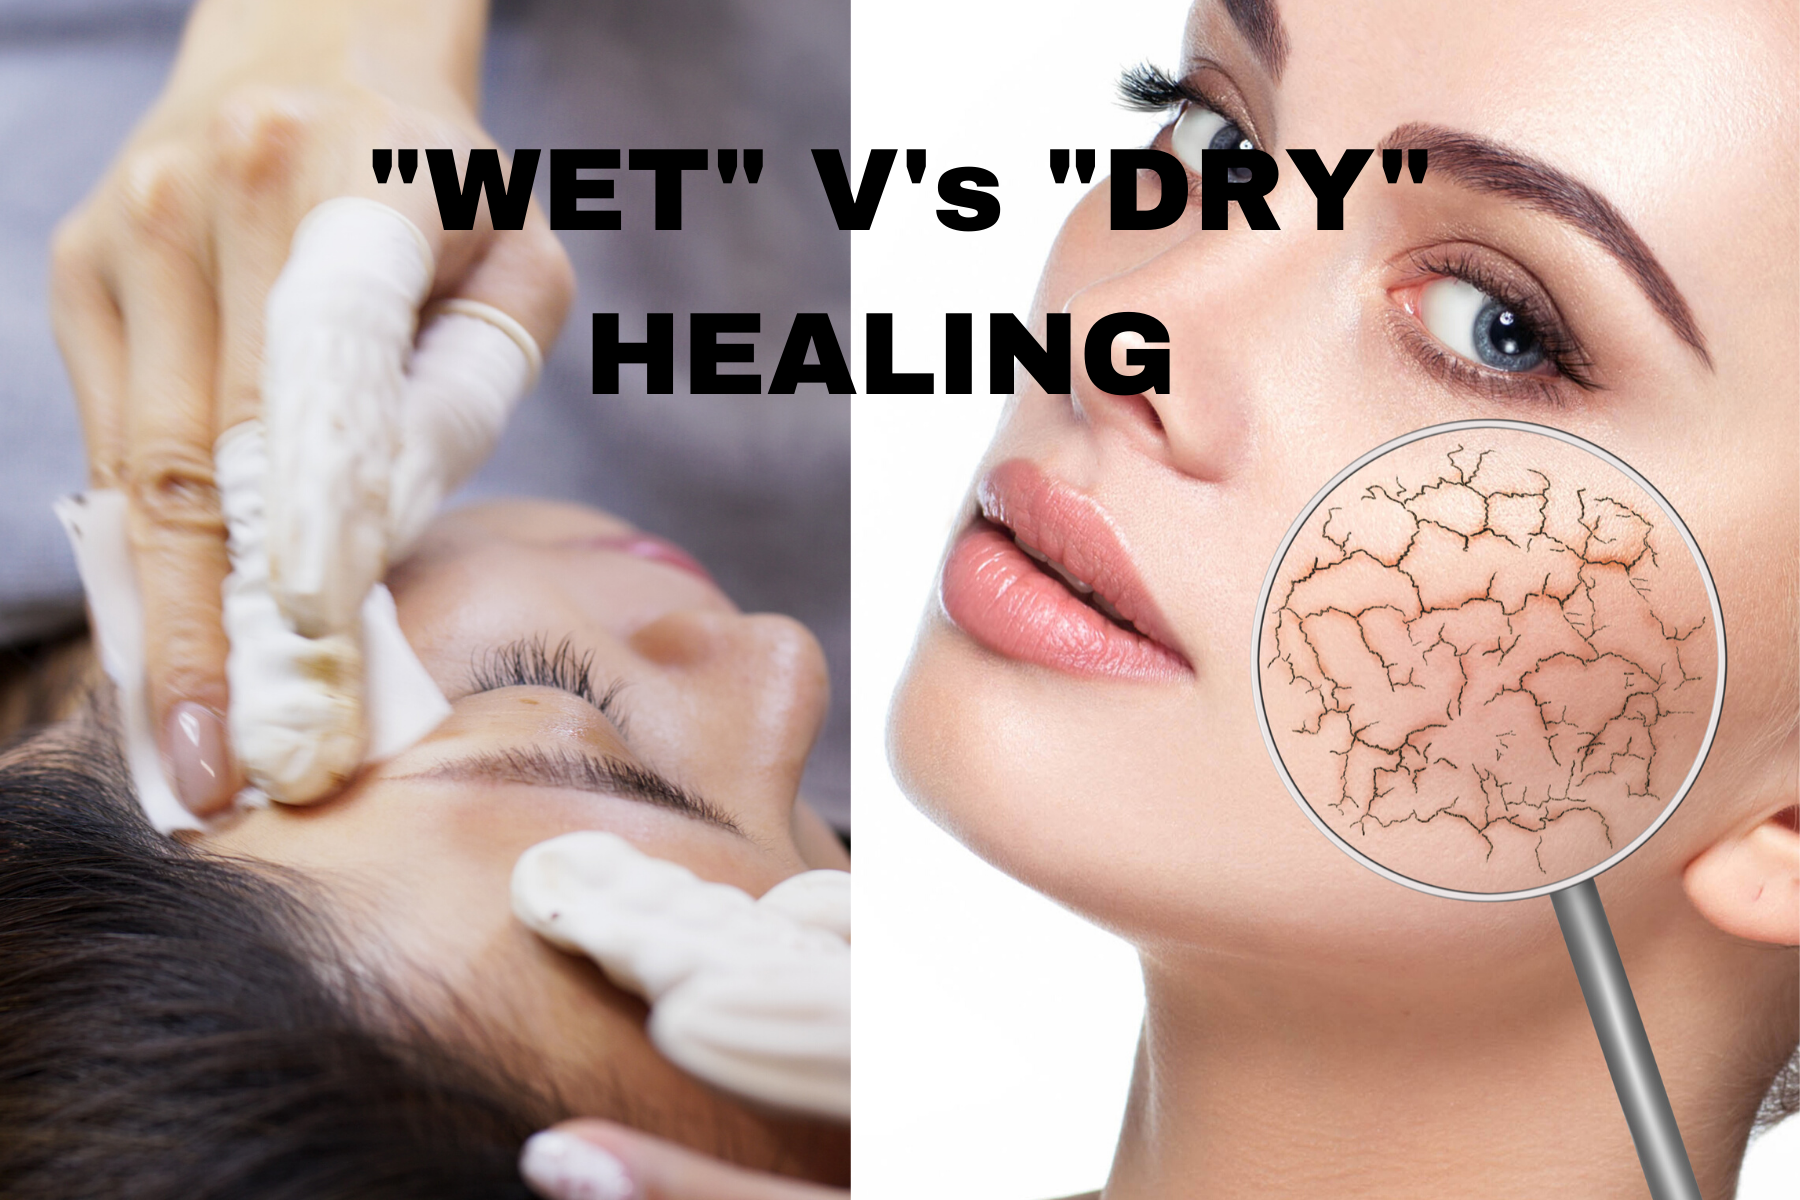 The myths between "WET V's DRY" Cosmetic / PMU Aftercare healing methods exposed